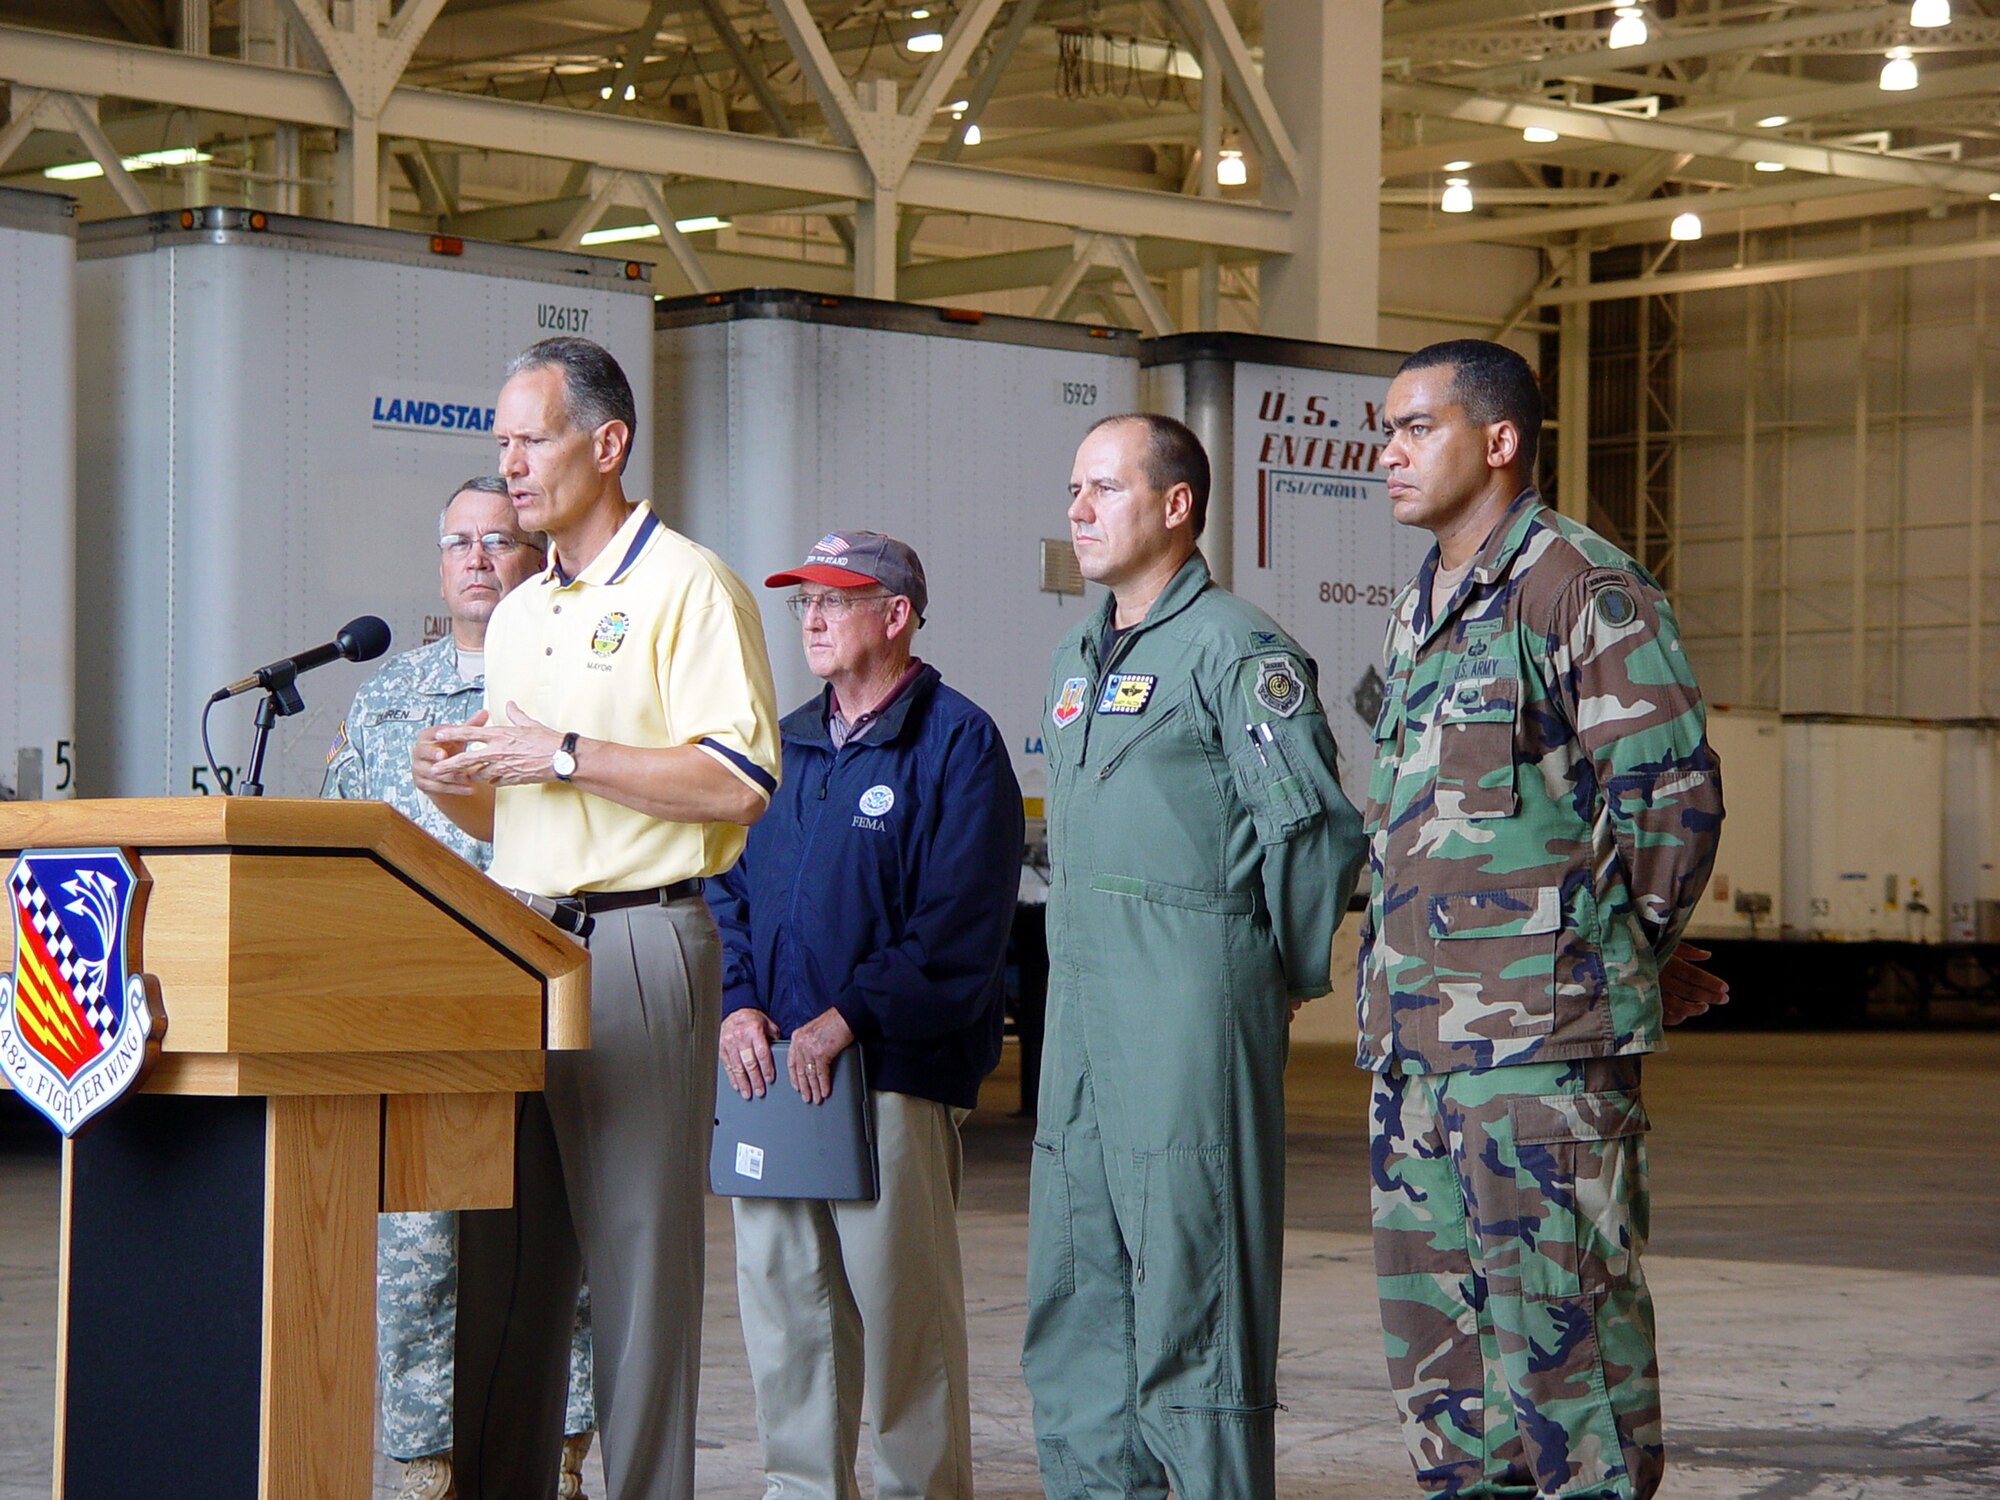 Officials host a joint press conference at Homestead Air Reserve Base, Fla. to inform local citizens about preparations for Hurricane Wilma.  The Federal Emergency Management Agency has partnered with Homestead Air Reserve Base to set up a relief staging area that will be used post-strike if necessary.  Picutred right to left:  Army Maj. Angel Mesa, 87th Brigade, Patrick AFB, Fla., Col. Randy Falcon, commander, 482d Fighter Wing, Homestead ARB, Fla., Mr. Frank Huff, FEMA's site coordinator at Homestead ARB, Fla., and Army Col. Joseph Duren, commander of the 50th Area Support Group, Florida Army National Guard.  Speaking at the podium is the Mayor of Miami-Dade County, Carlos Alvarez.